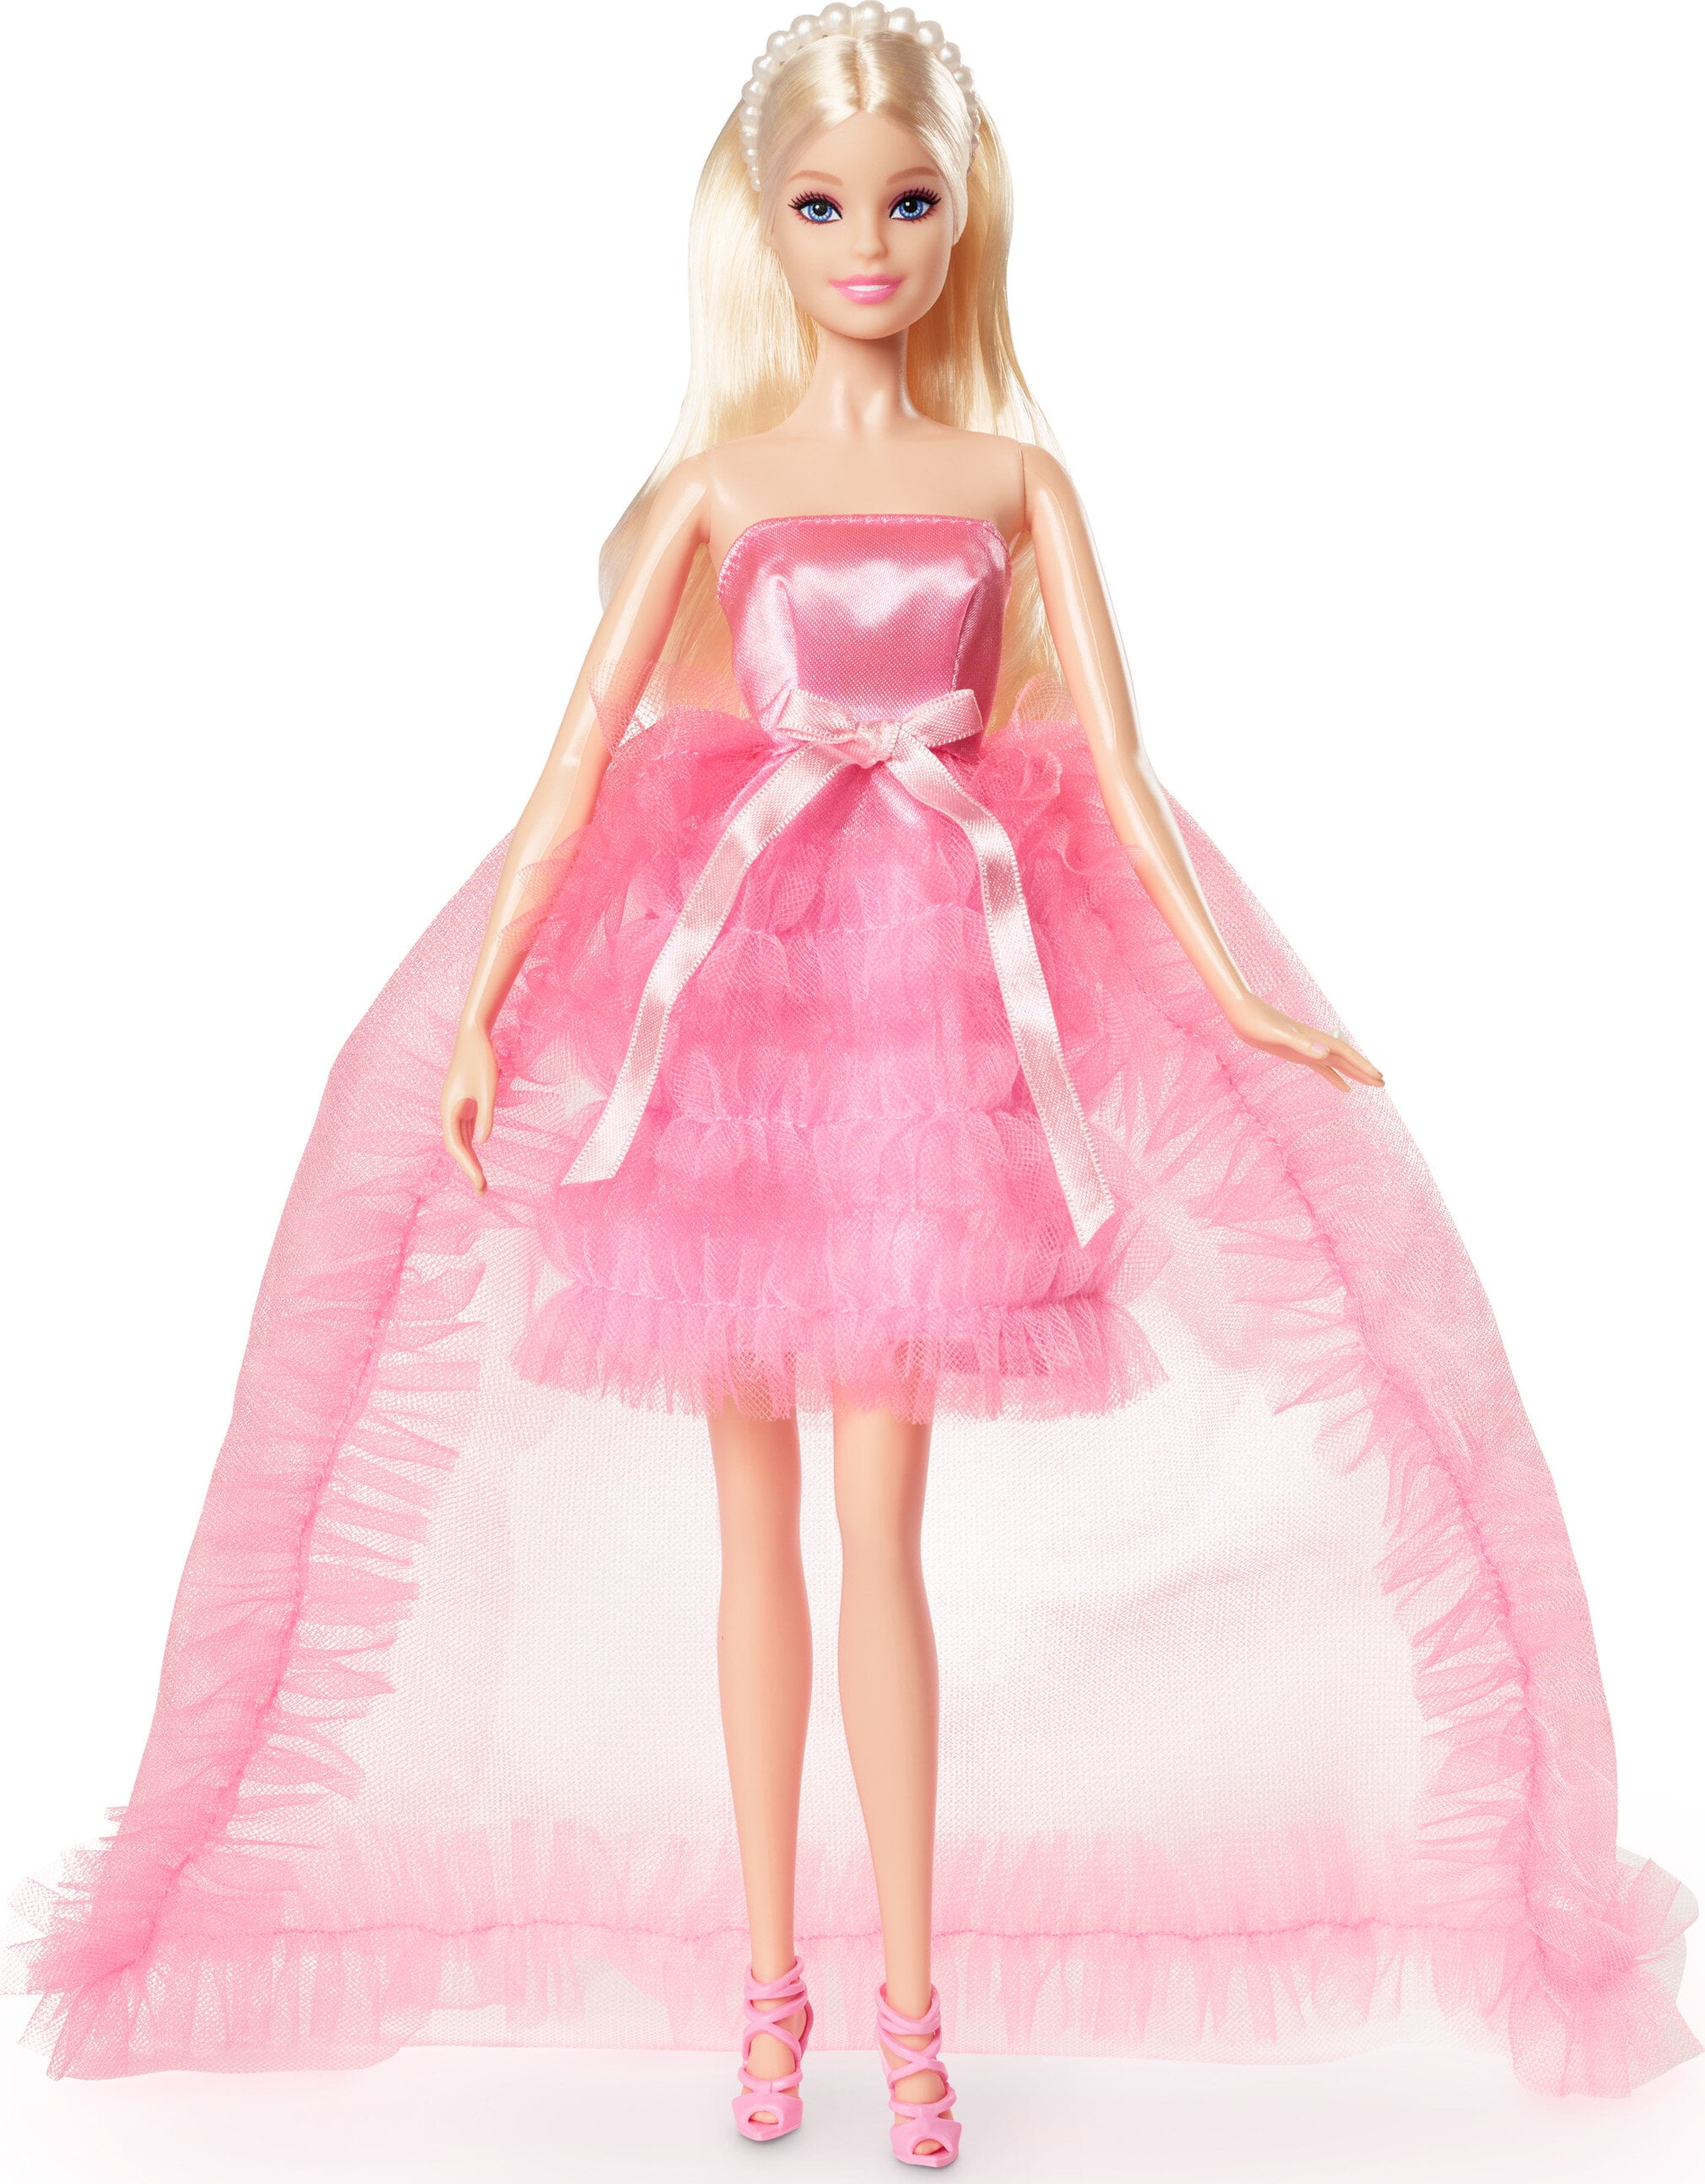 barbie with pink dress